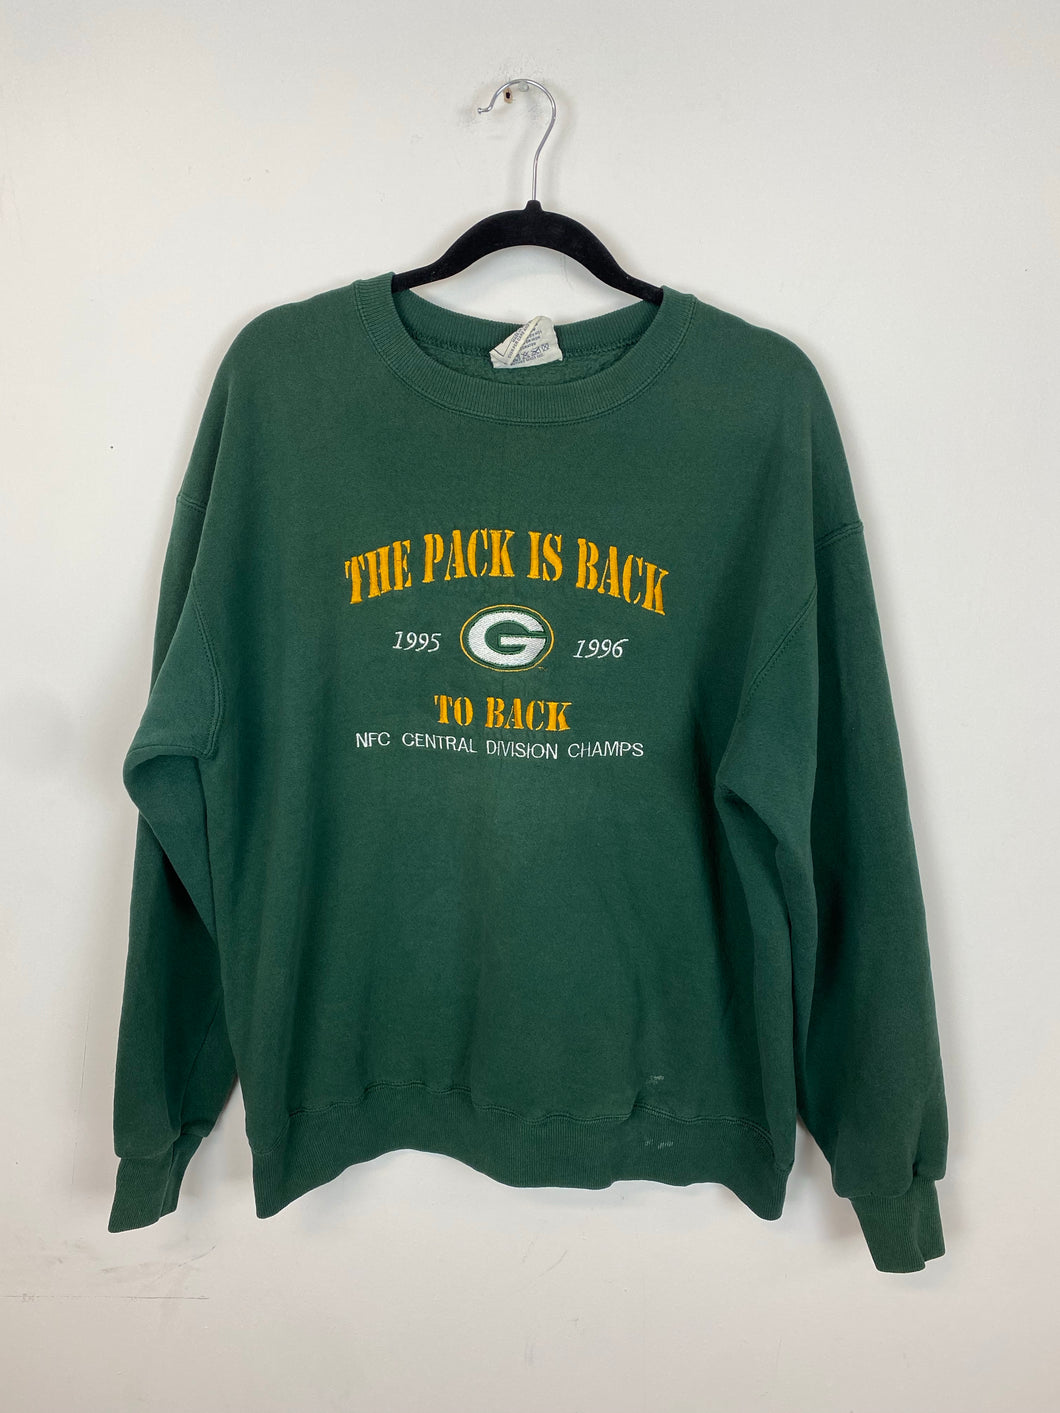 Embroidered Green Bay Packers crewneck - S/M